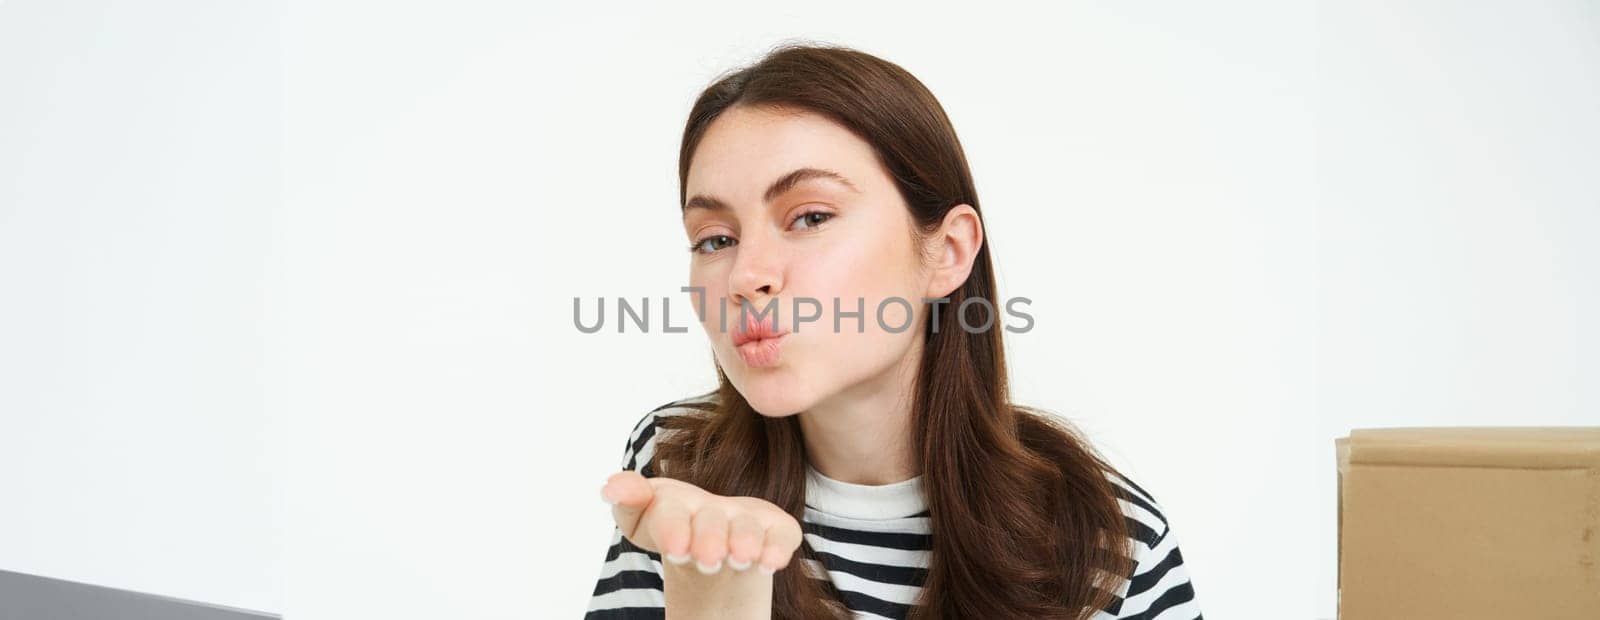 Portrait of cute girl sending you, blowing air kiss, holding palm near puckered lips, smiling, standing over white background.